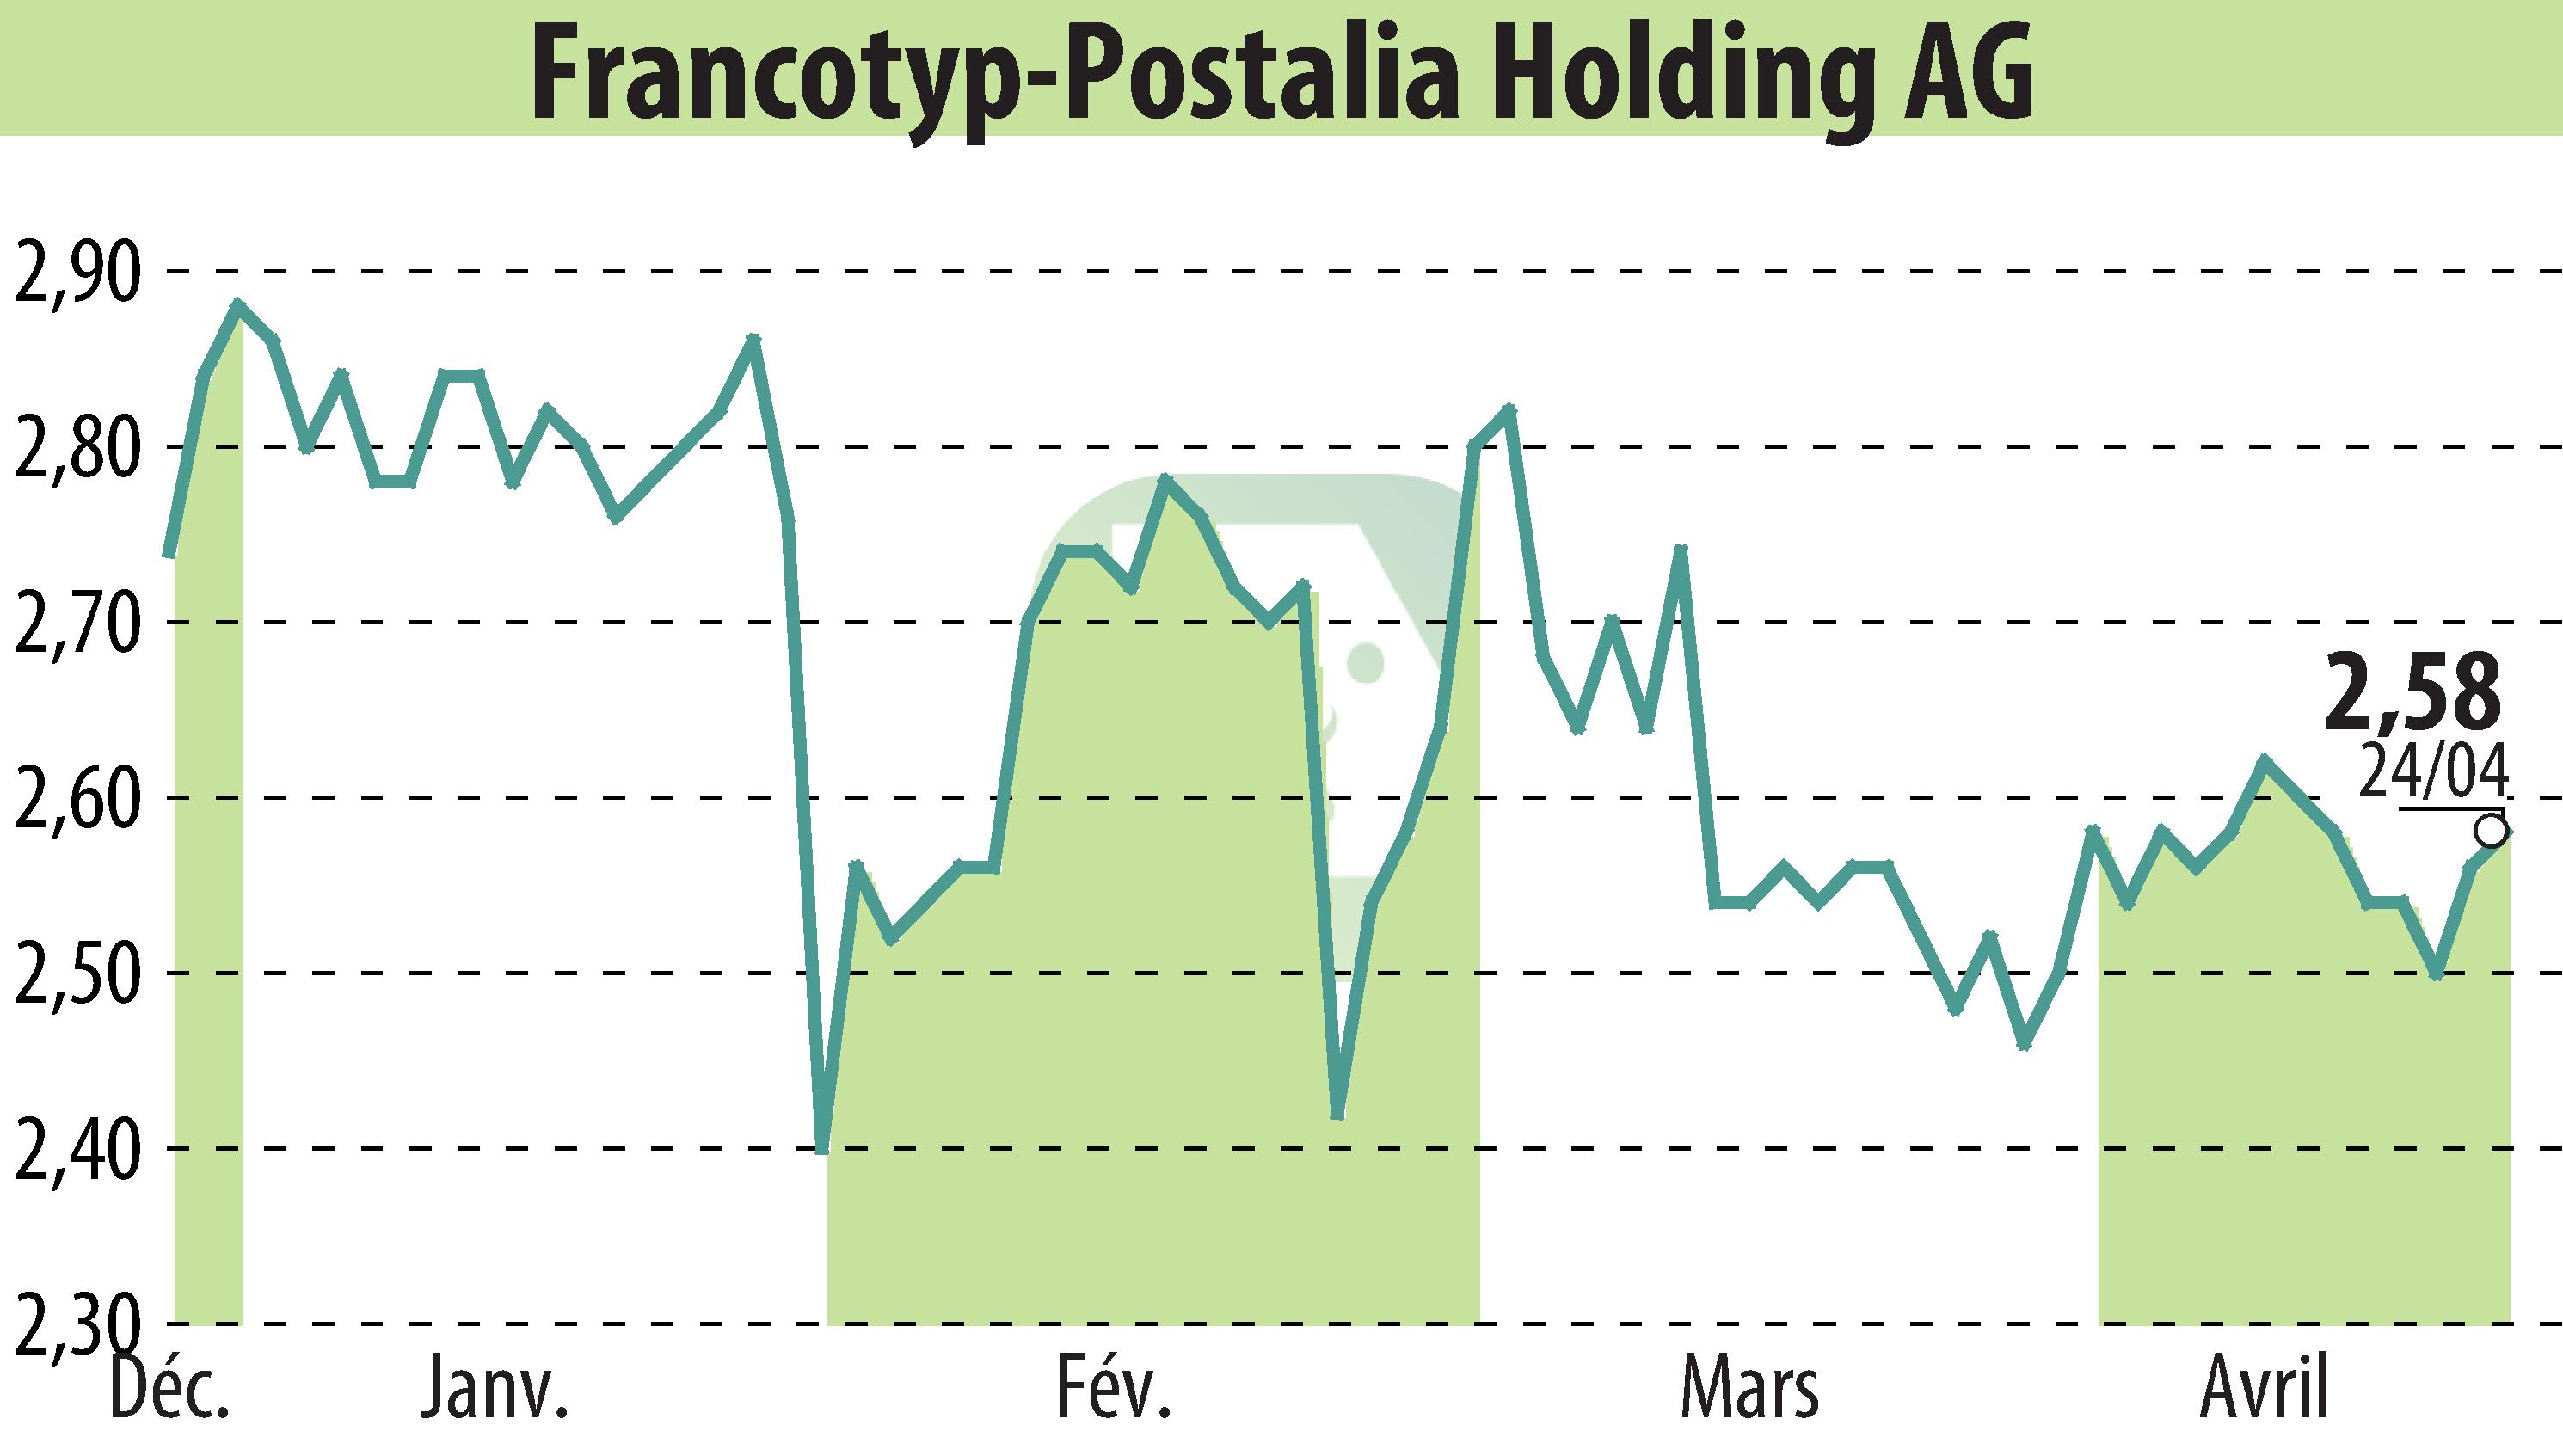 Stock price chart of Francotyp-Postalia Holding AG (EBR:FPH) showing fluctuations.